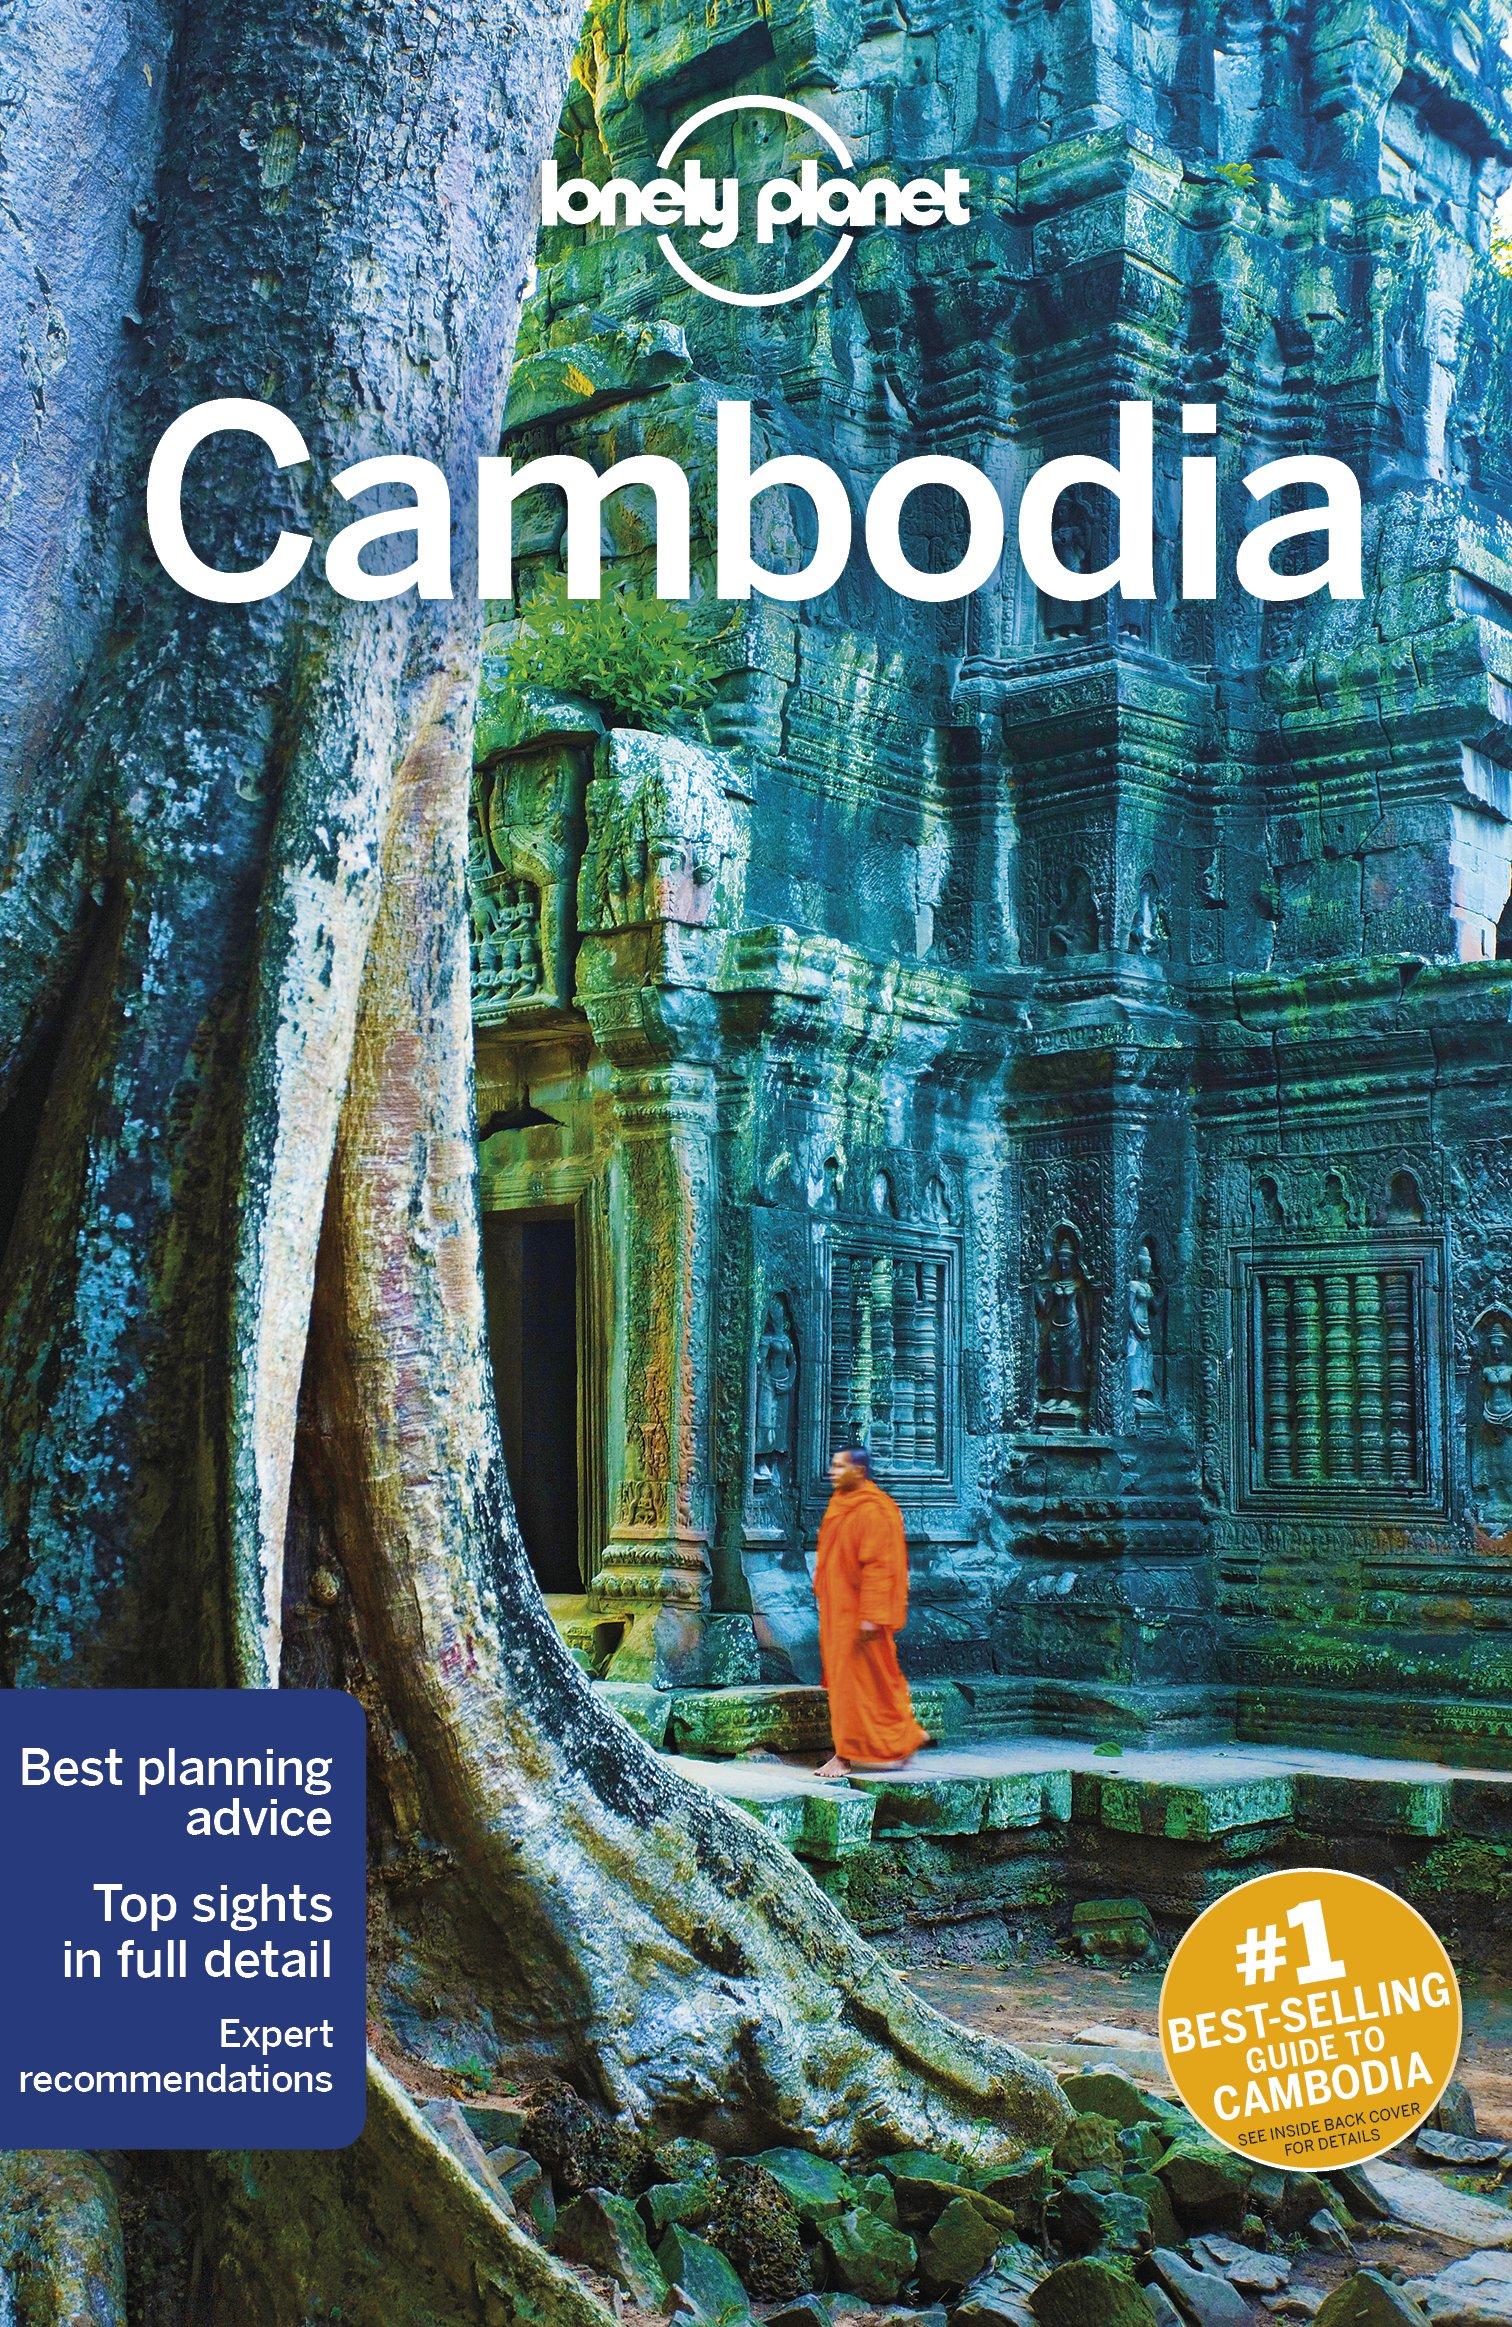 Lonely Planet: Cambodia